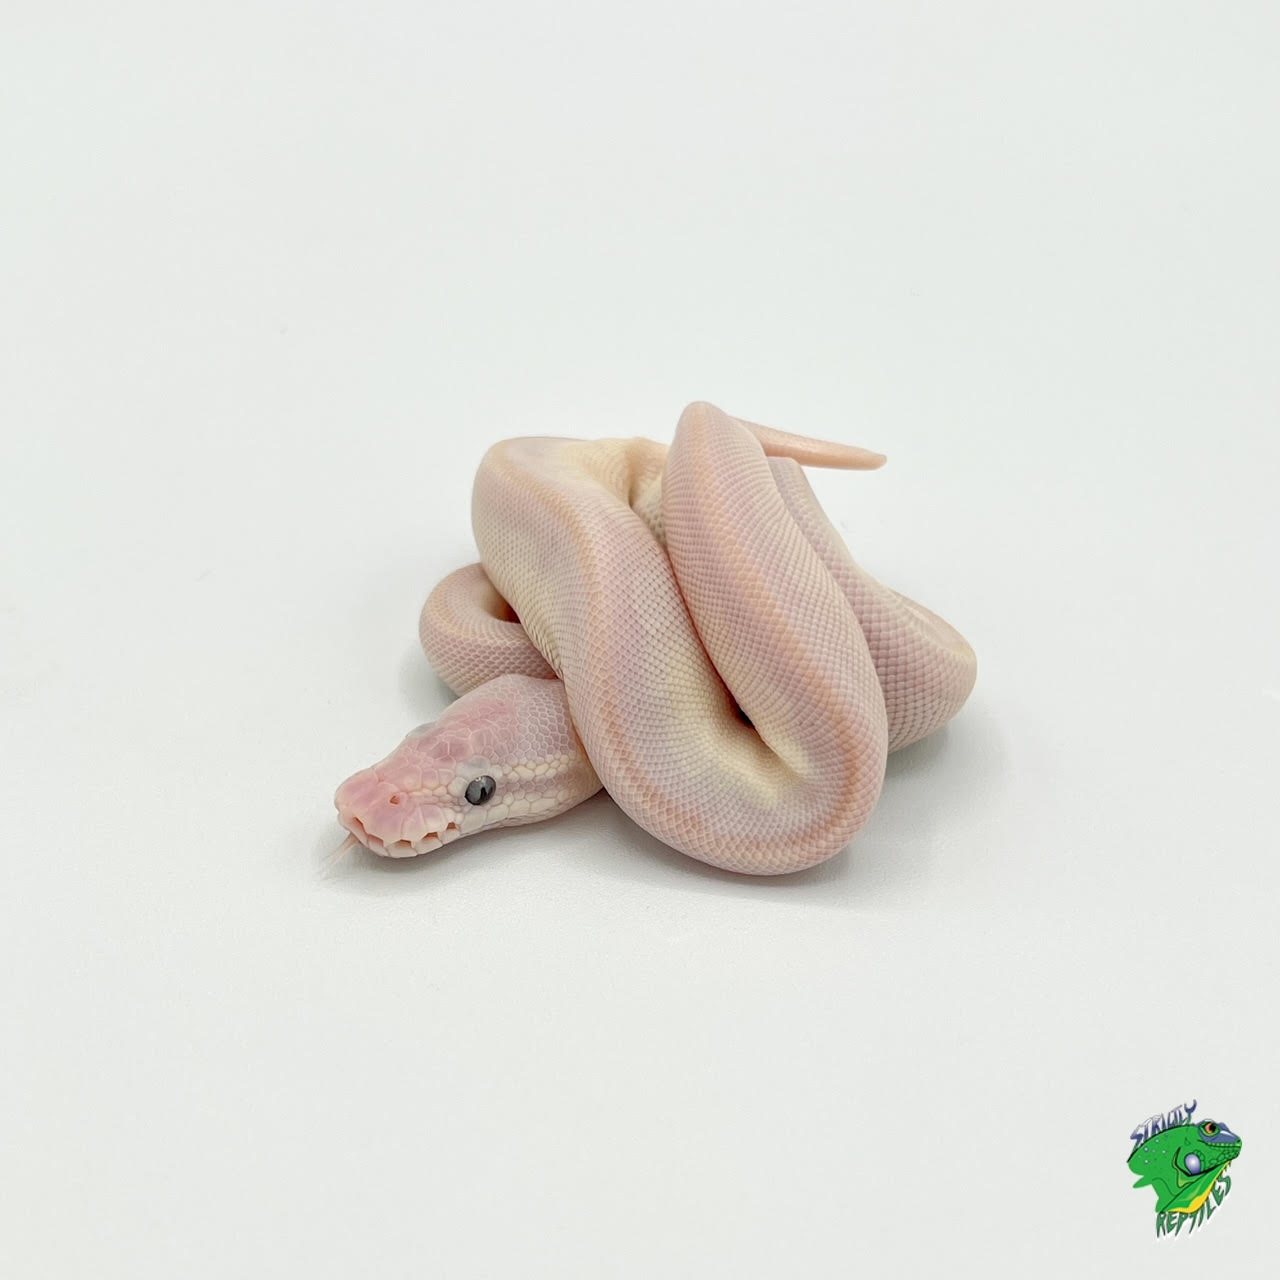 Piebald Ball Python 50 To 60 850gram Male Strictly Reptiles Inc